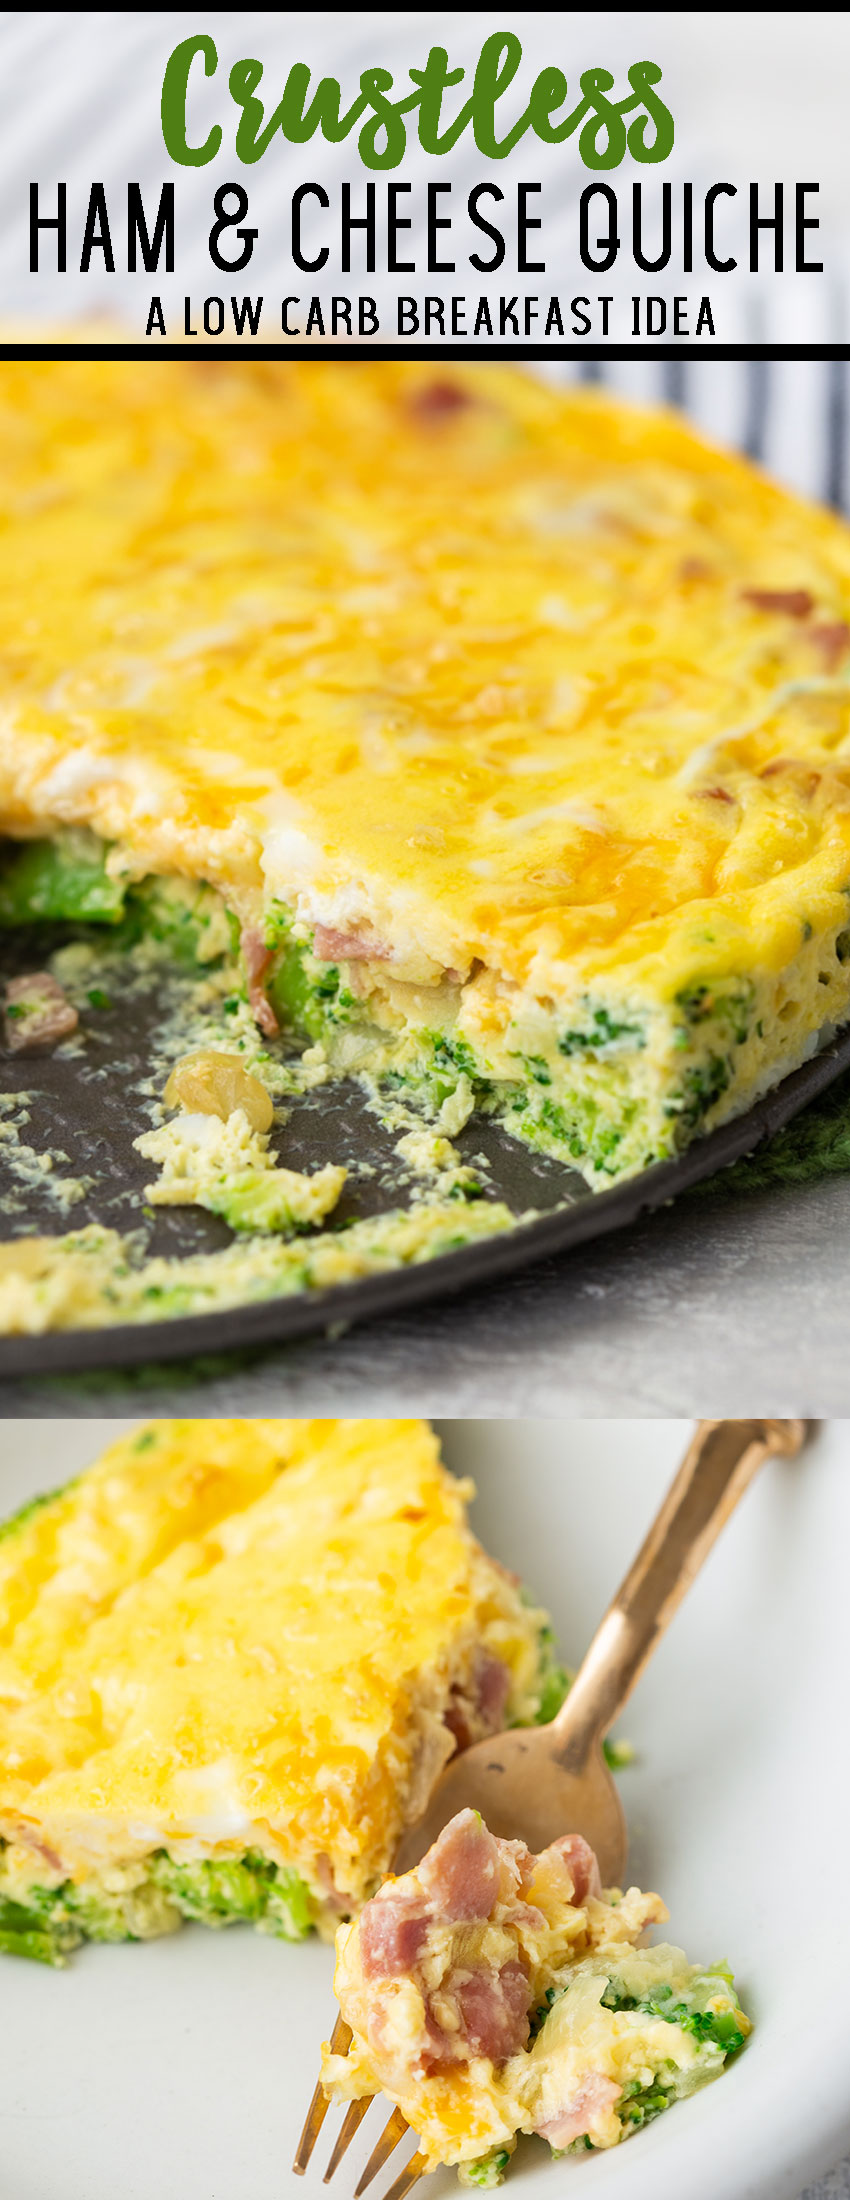 Ham broccoli and cheese in a crustless quiche, great for low carb or keto